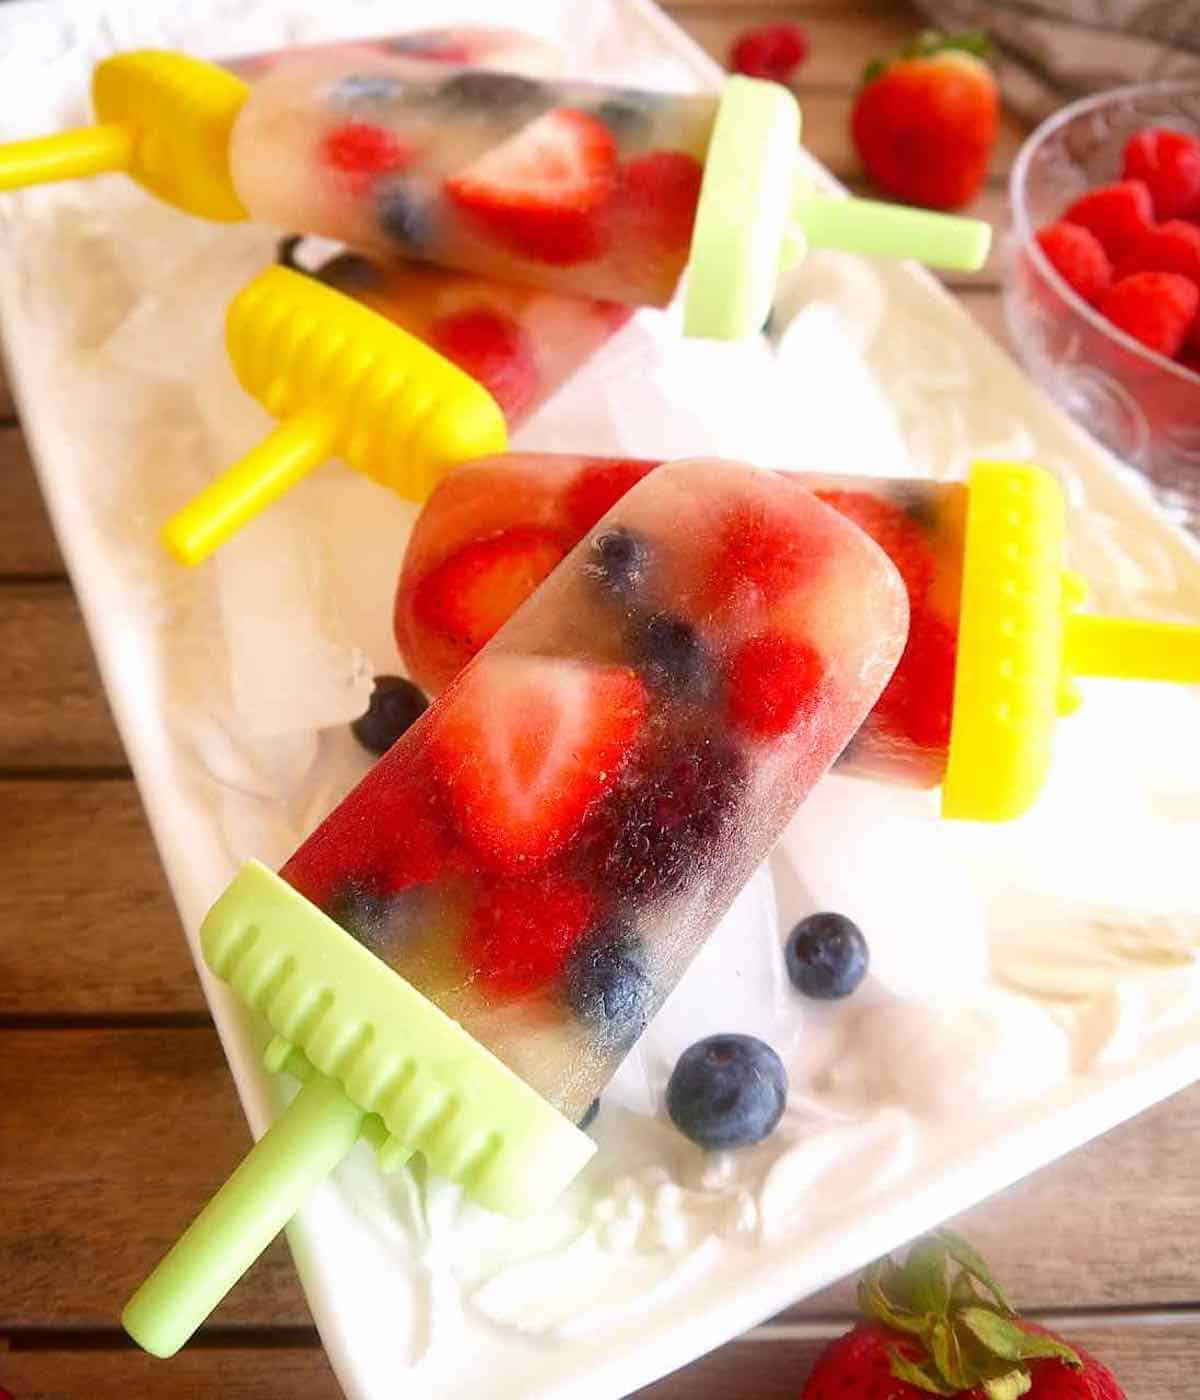 Apple juice popsicles with berries on ice.